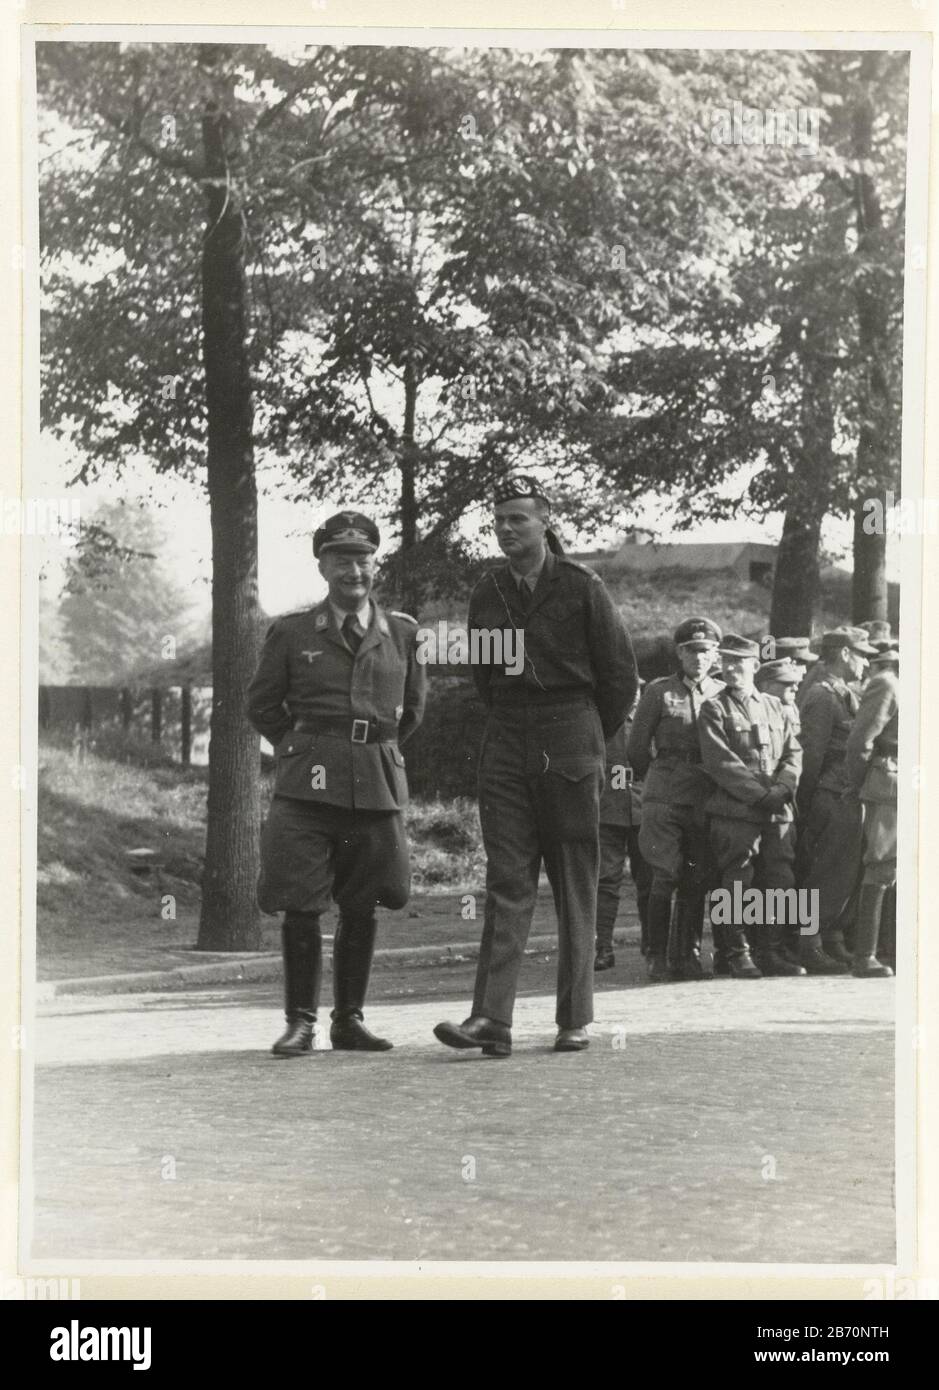 Krijgsgevangen Duitsers German prisoner of war guarded by English? military. Left high Luftwaffe officer next to him military of the Allies. In the background krijgsgevangenen. Manufacturer : Photographer: anonymous place manufacture: Netherlands Date: May 1945 Material: paper Technique: Photography Dimensions: H 13 cm. B × 17.5 cm.  Subject: prisoner of war (after the battle) Liberation Second World When: 1945-05 - 1945-05 Stock Photo